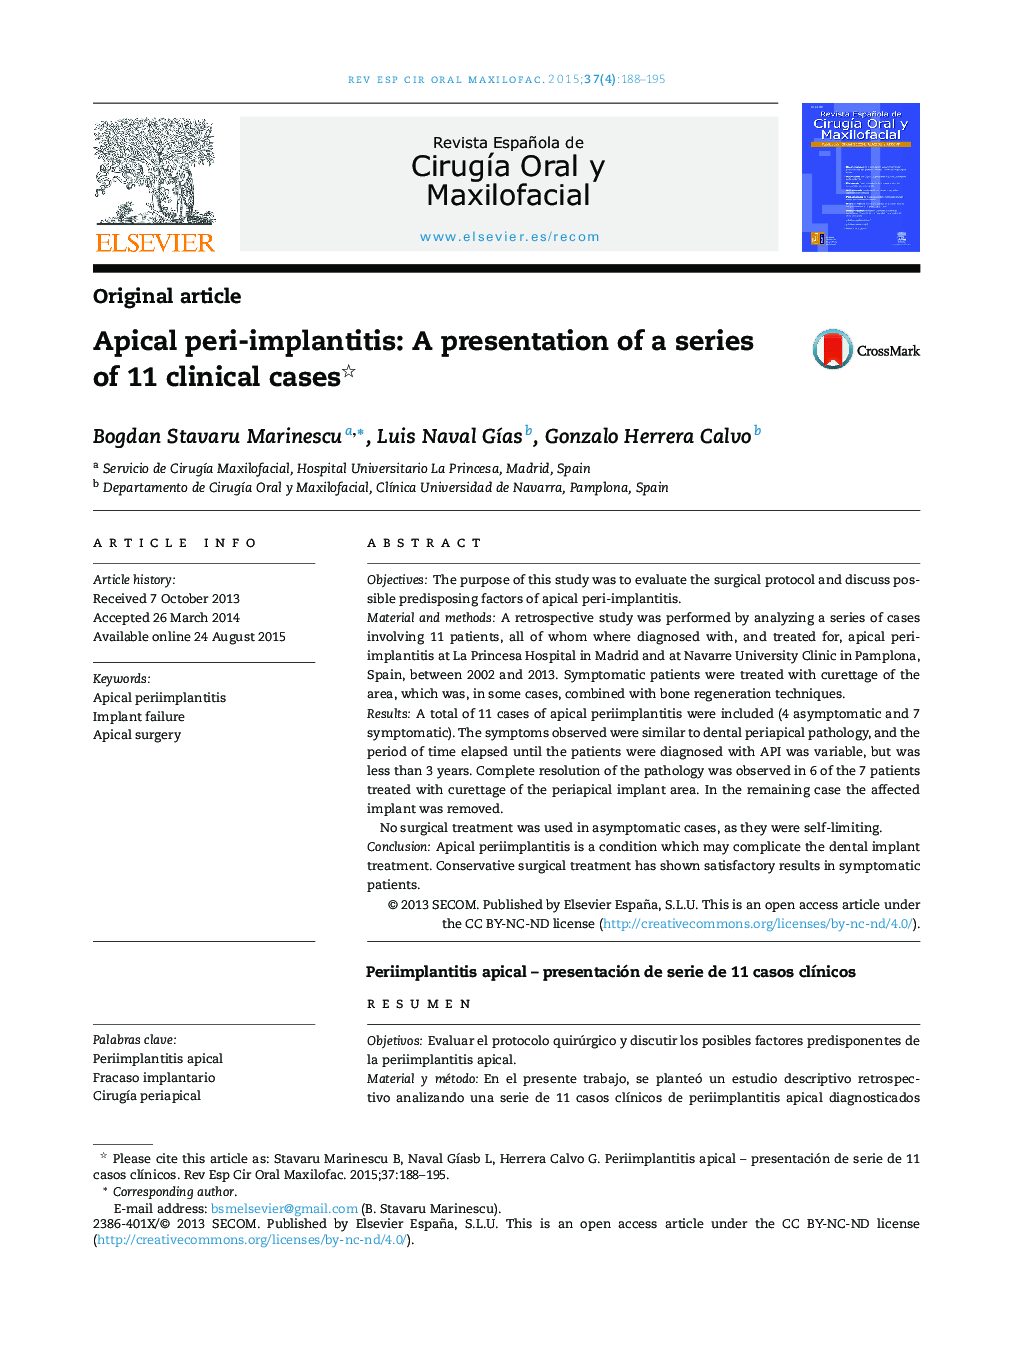 Apical peri-implantitis: A presentation of a series of 11 clinical cases 